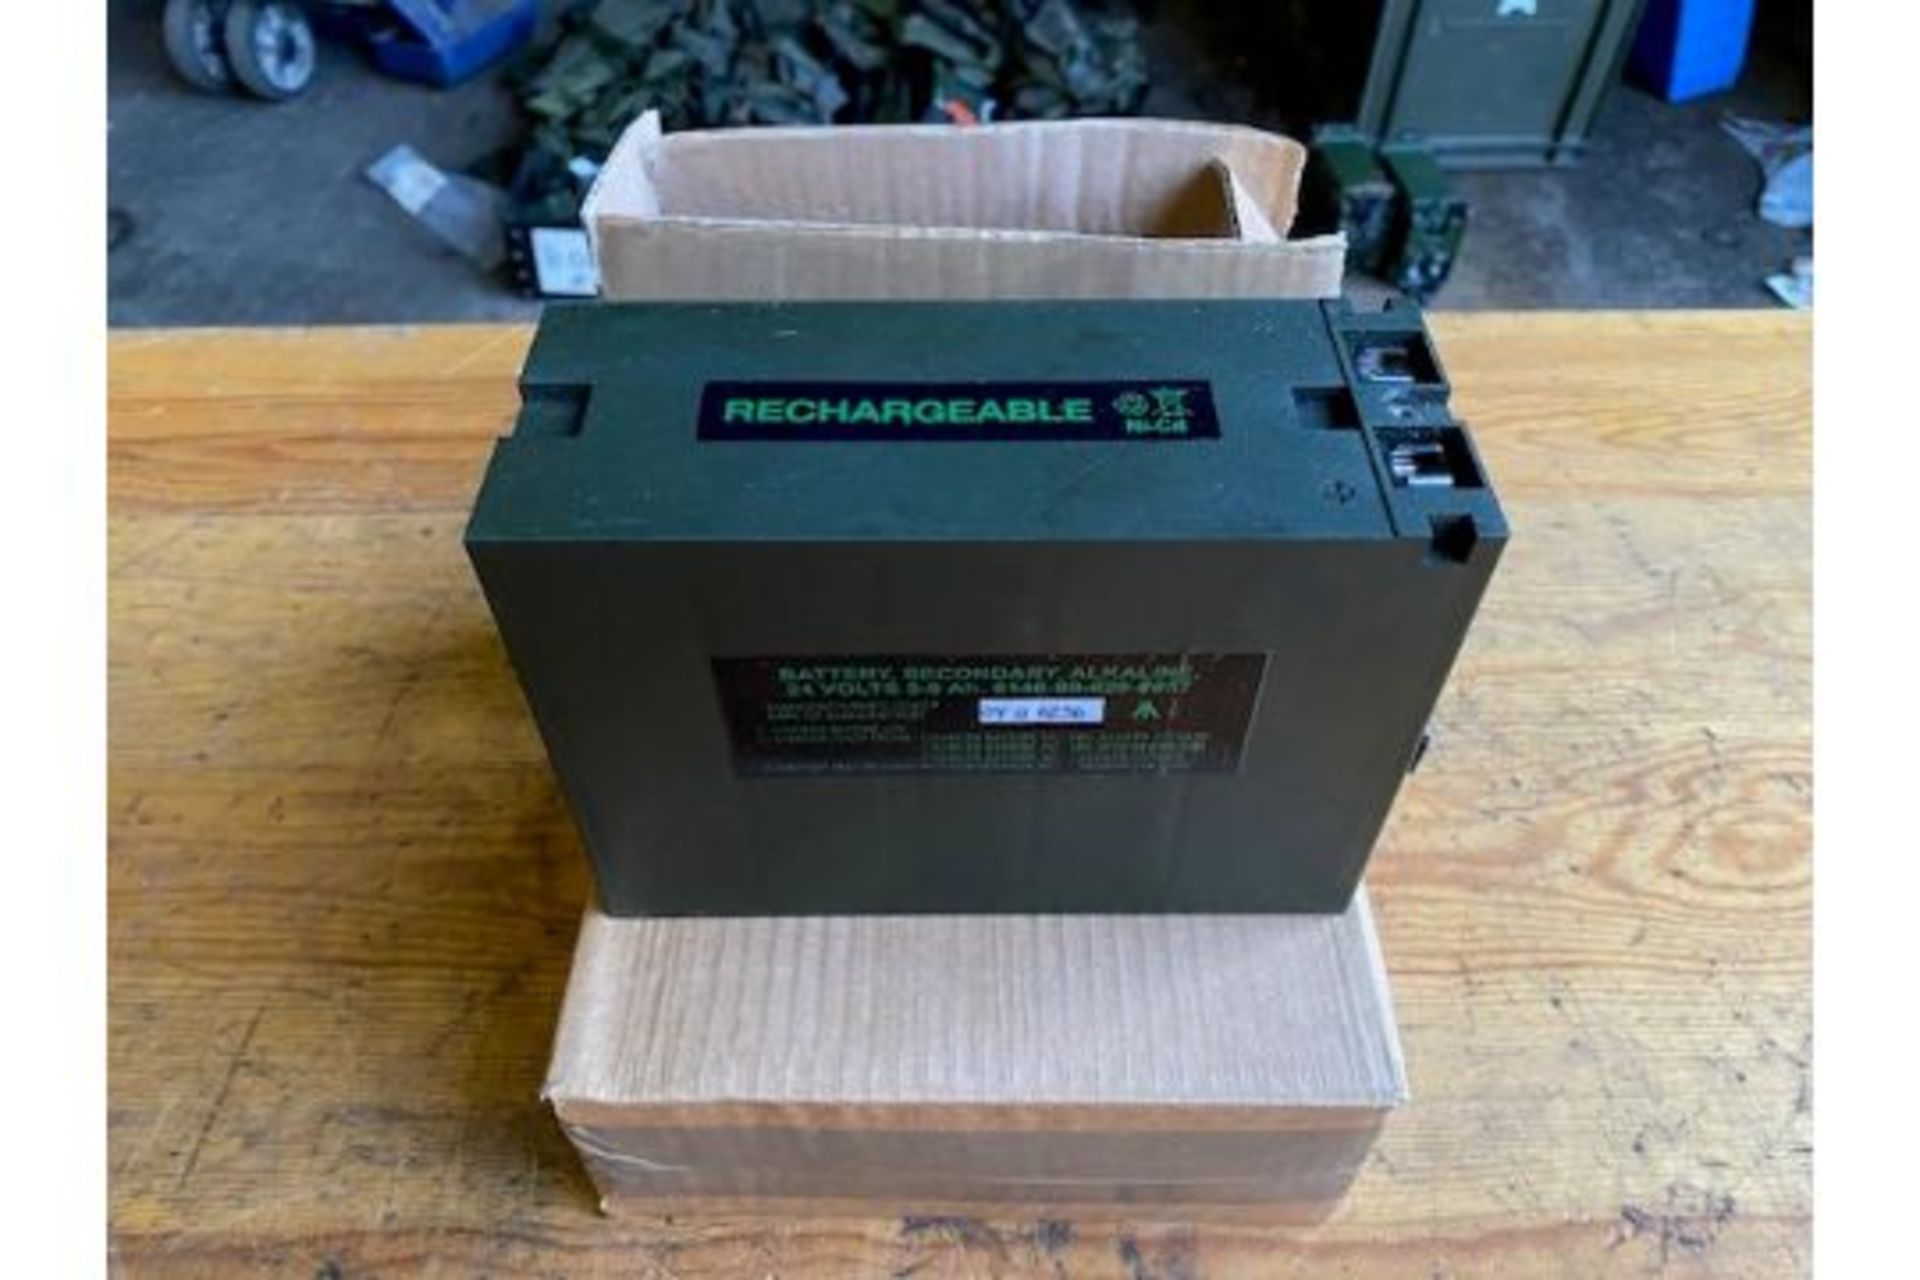 2 x New Unissued Clansman 24 Volt Rechargeable Radio Battery